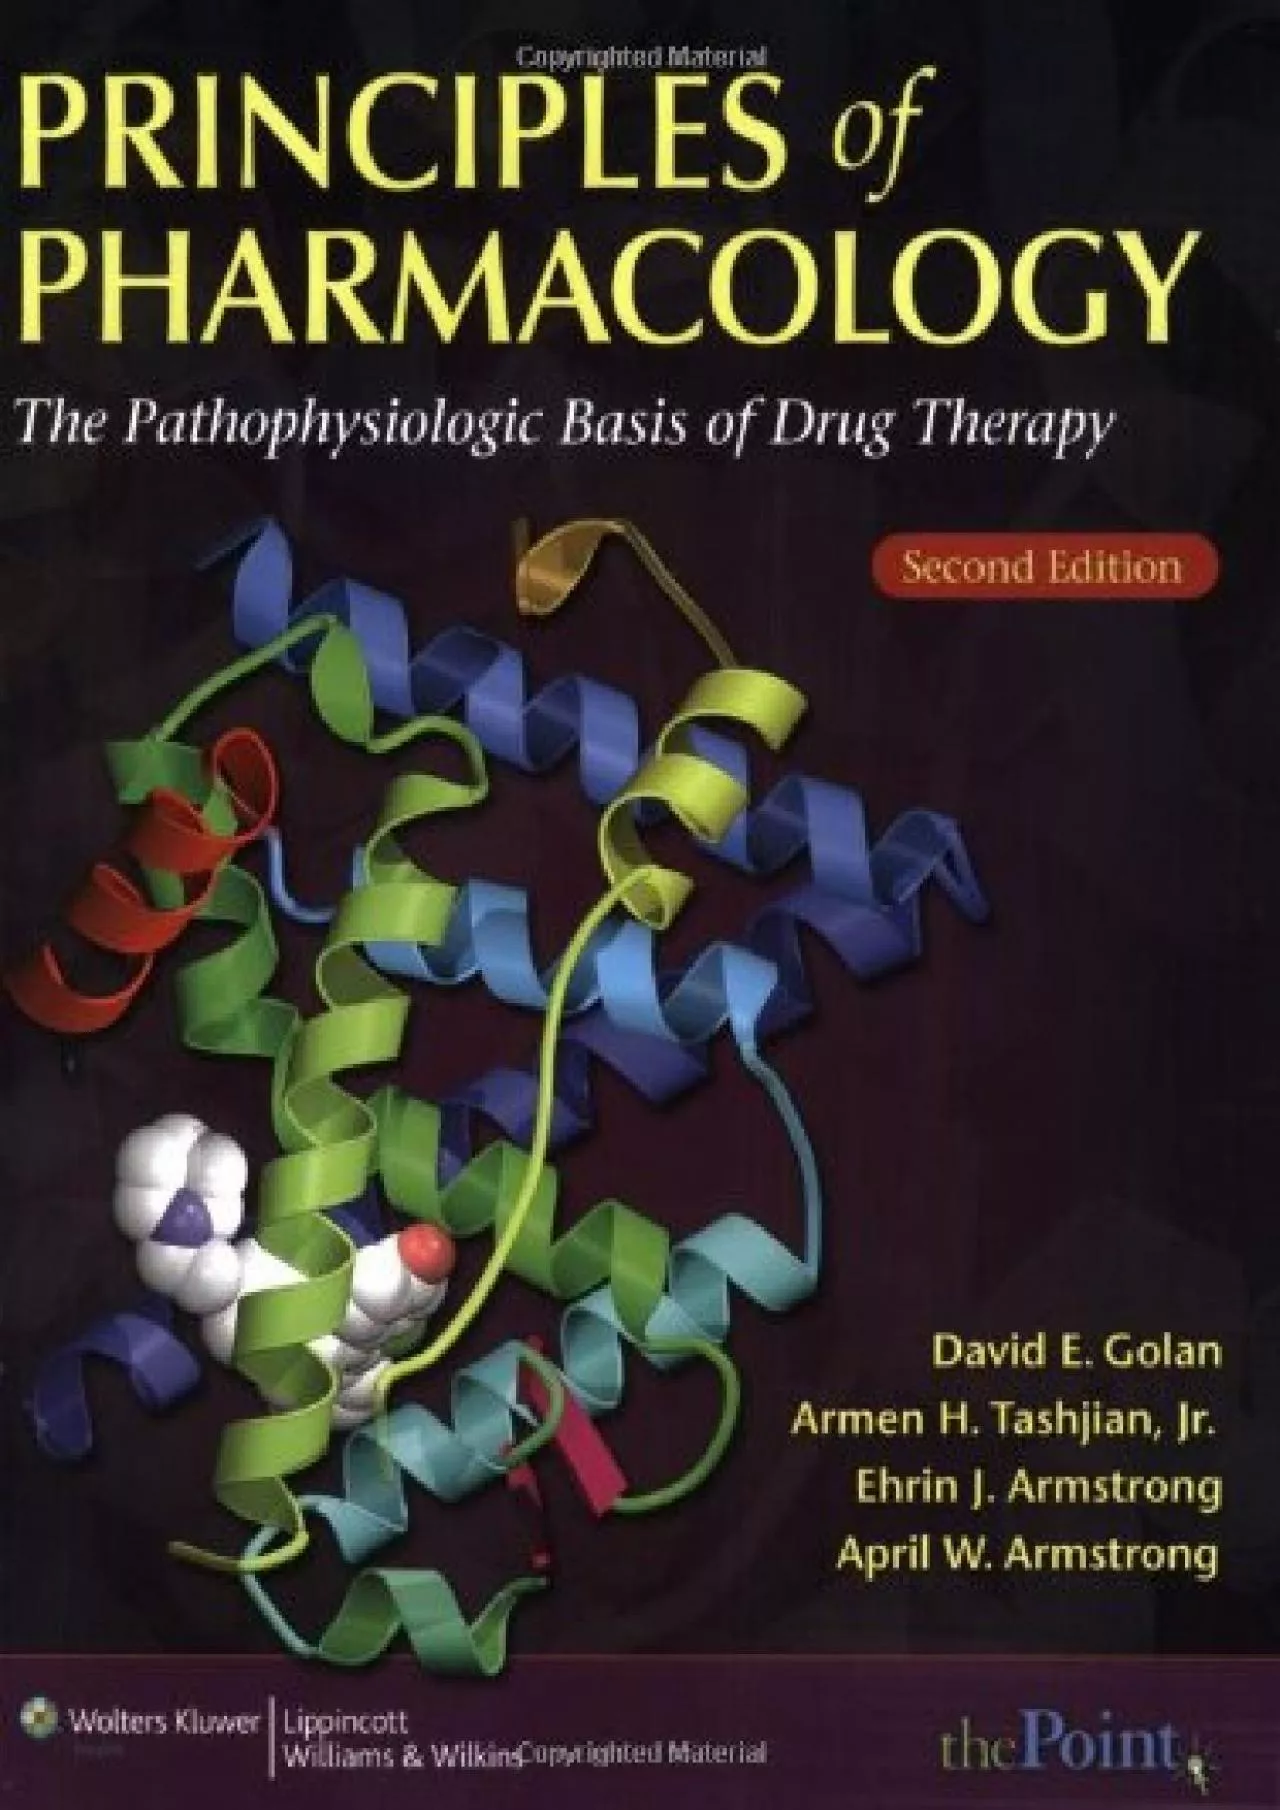 (BOOK)-Principles of Pharmacology: The Pathophysiologic Basis of Drug Therapy, 2e